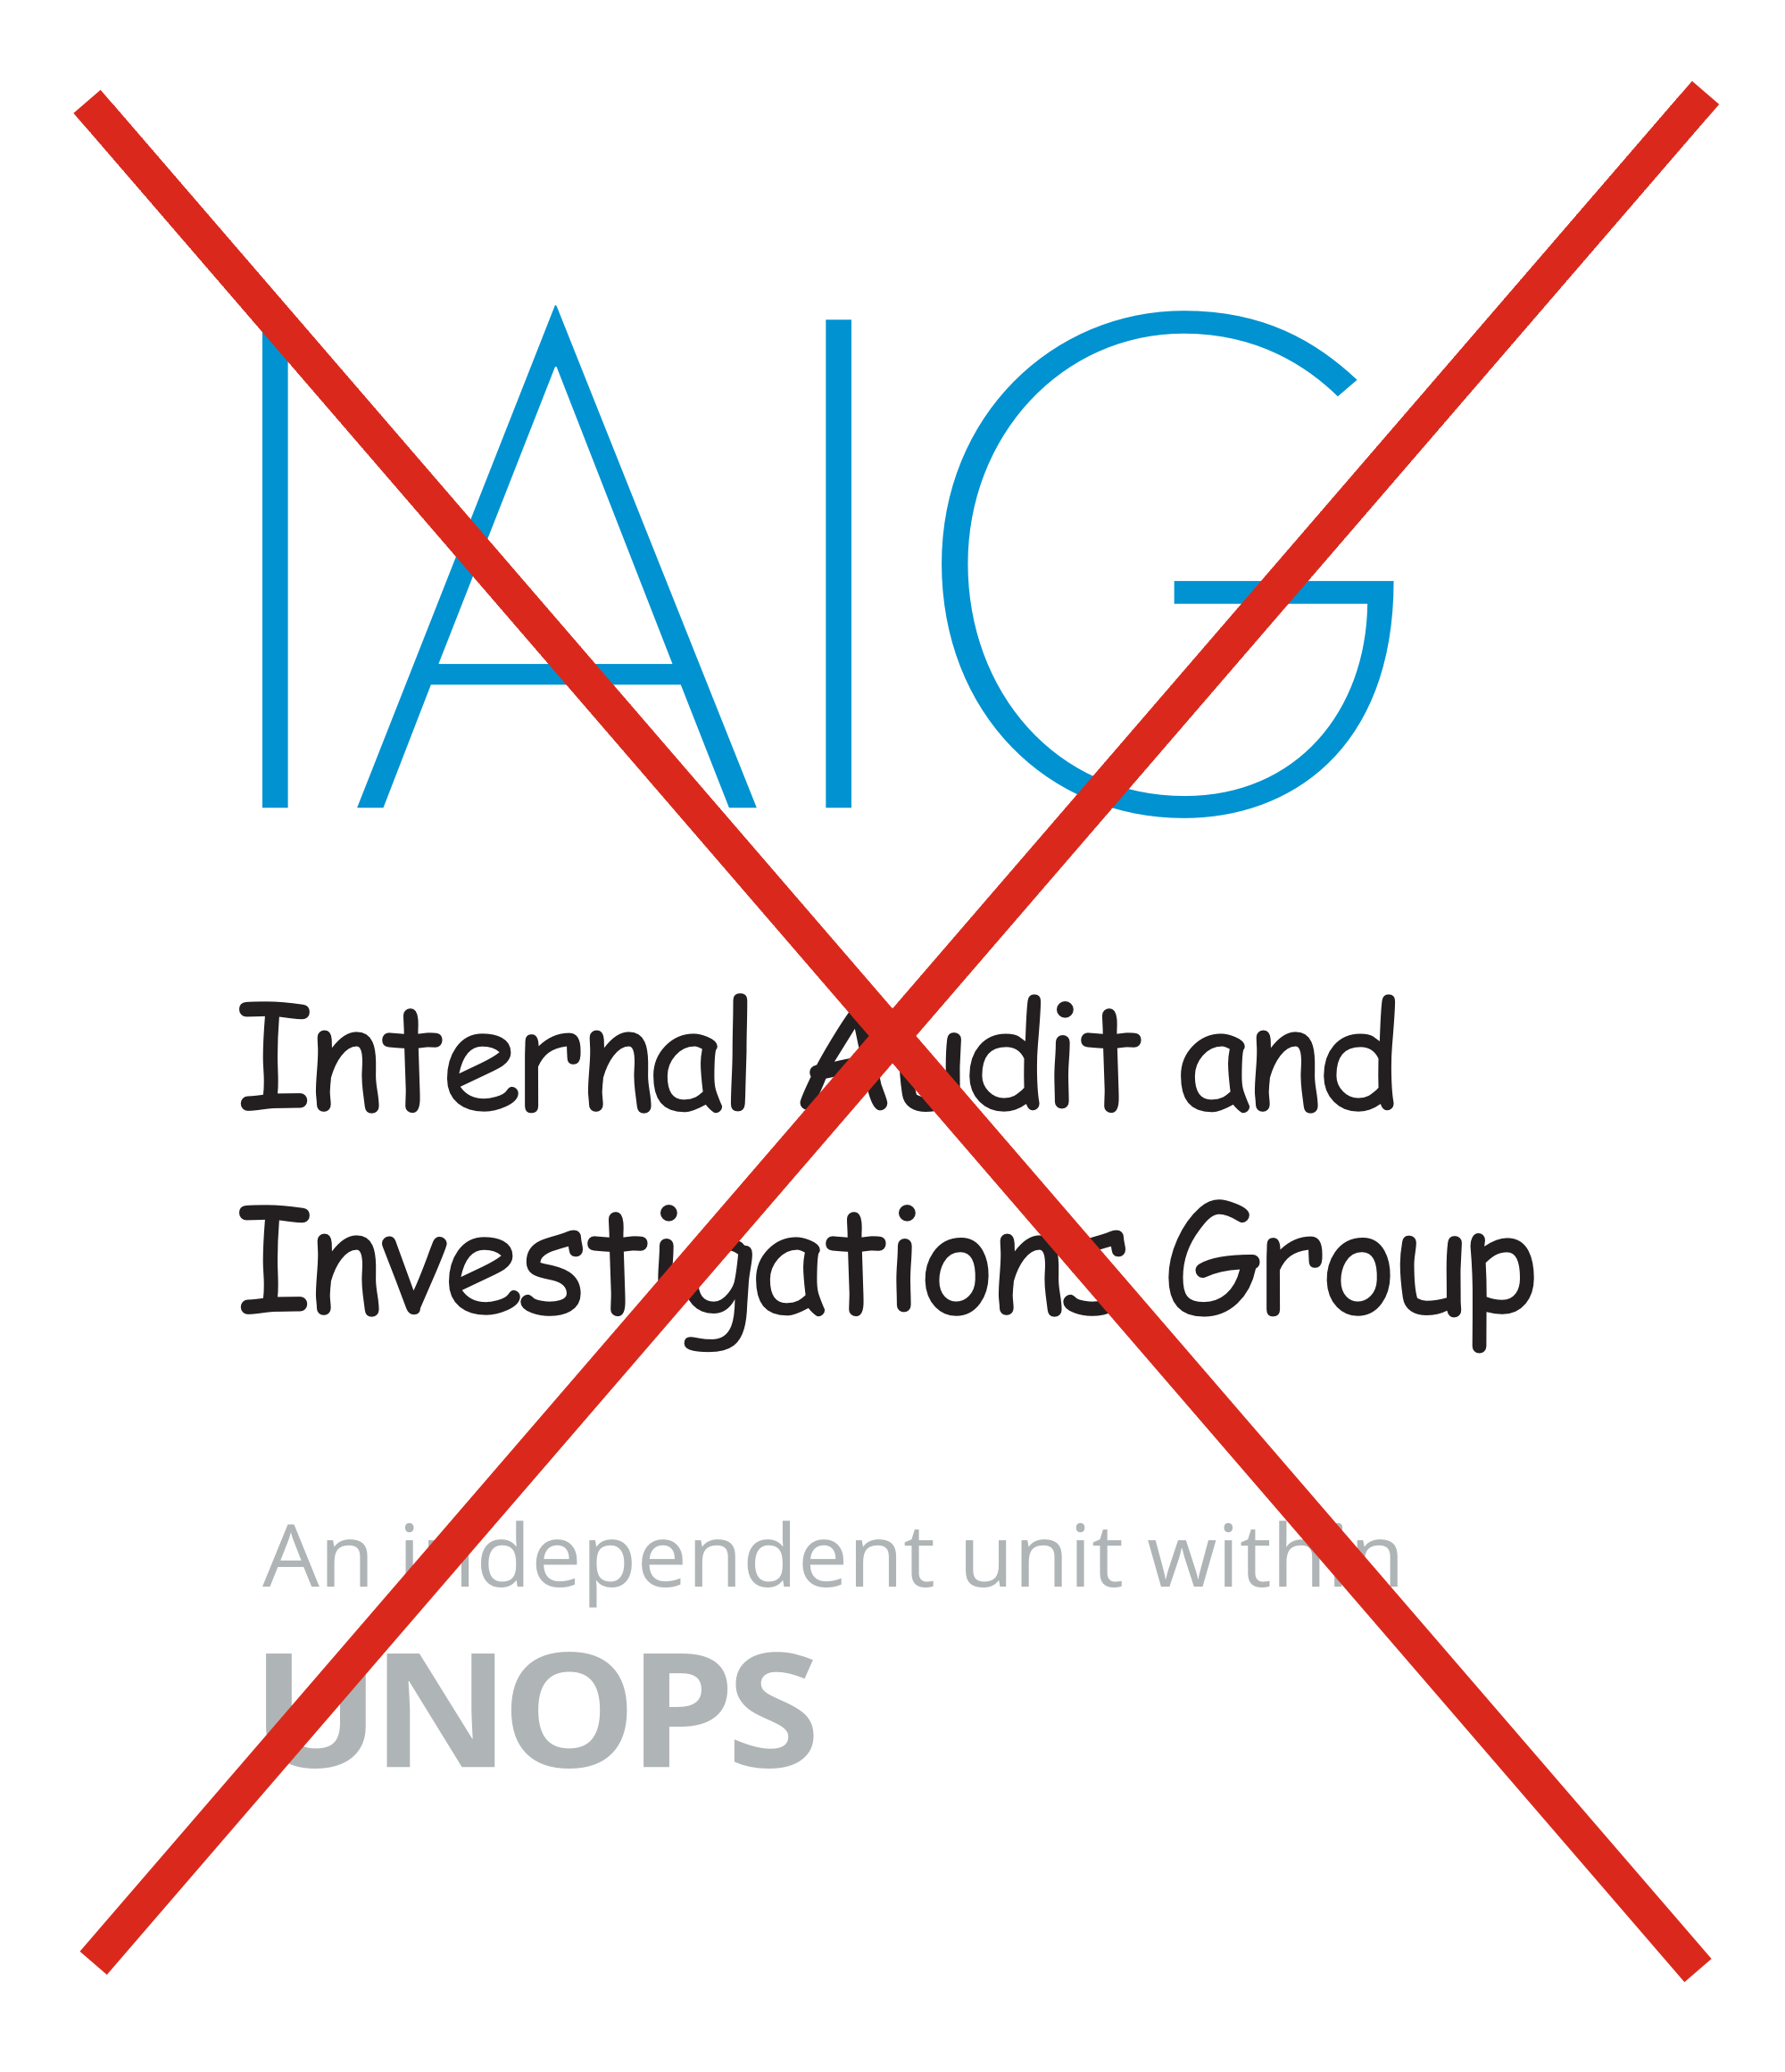 Do not type out any portion of the IAIG logo in any other fonts.